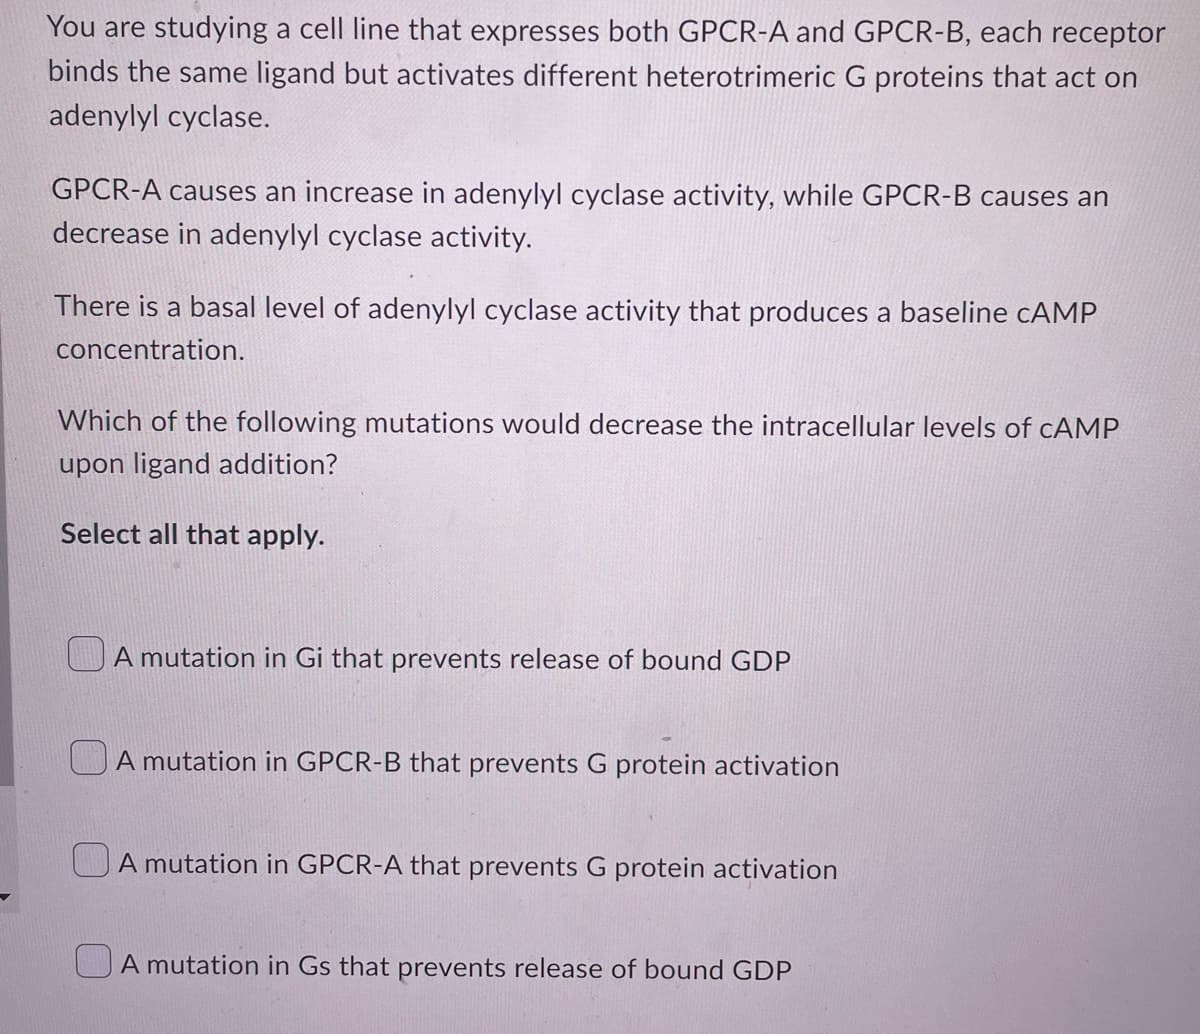 You are studying a cell line that expresses both GPCR-A and GPCR-B, each receptor
binds the same ligand but activates different heterotrimeric G proteins that act on
adenylyl cyclase.
GPCR-A causes an increase in adenylyl cyclase activity, while GPCR-B causes an
decrease in adenylyl cyclase activity.
There is a basal level of adenylyl cyclase activity that produces a baseline CAMP
concentration.
Which of the following mutations would decrease the intracellular levels of cAMP
upon ligand addition?
Select all that apply.
A mutation in Gi that prevents release of bound GDP
A mutation in GPCR-B that prevents G protein activation
A mutation in GPCR-A that prevents G protein activation
A mutation in Gs that prevents release of bound GDP